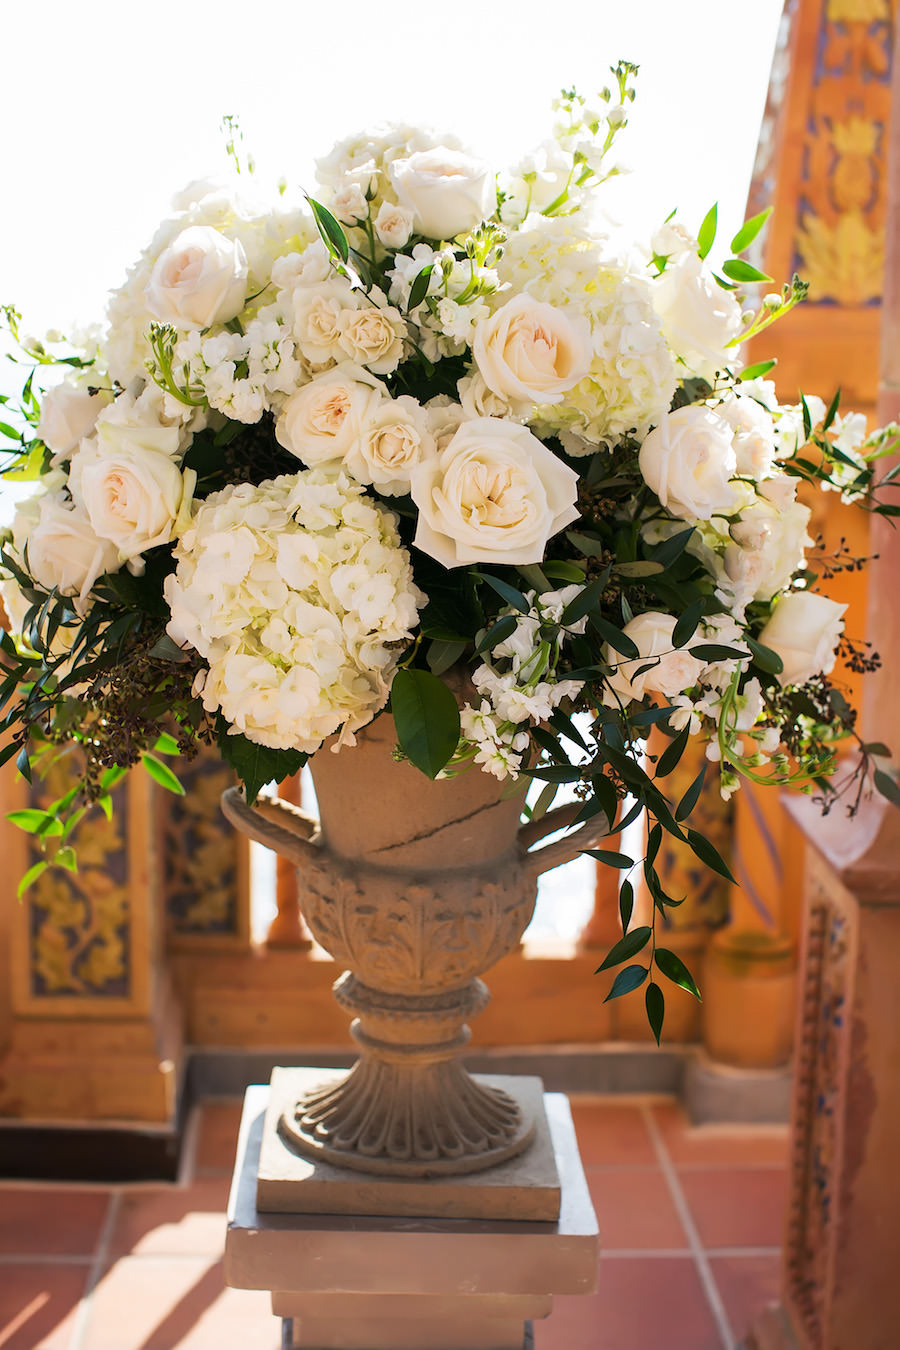 White and Ivory Rose and Hydrangea Outdoor Wedding Ceremony Floral Arrangements Decor